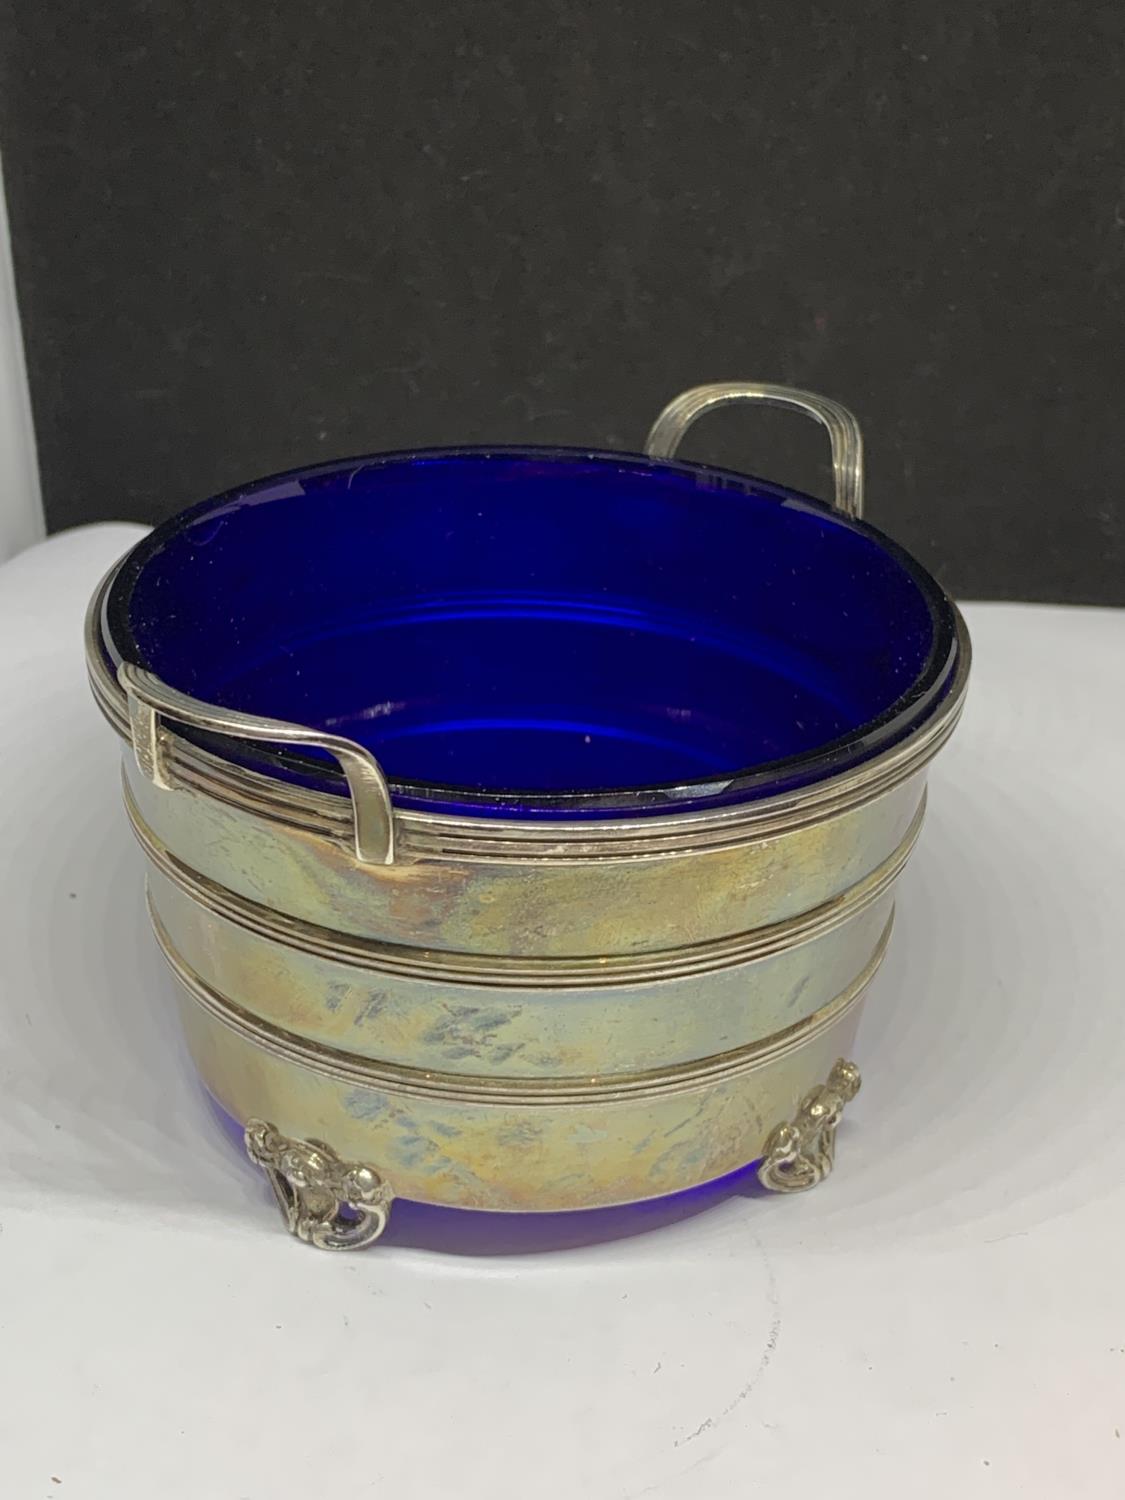 A HALLMARKED BIRMINGHAM SILVER TWIN HANDLED DEEP DISH ON FOUR DECORATIVE FEET WITH BLUE GLASS - Image 2 of 6